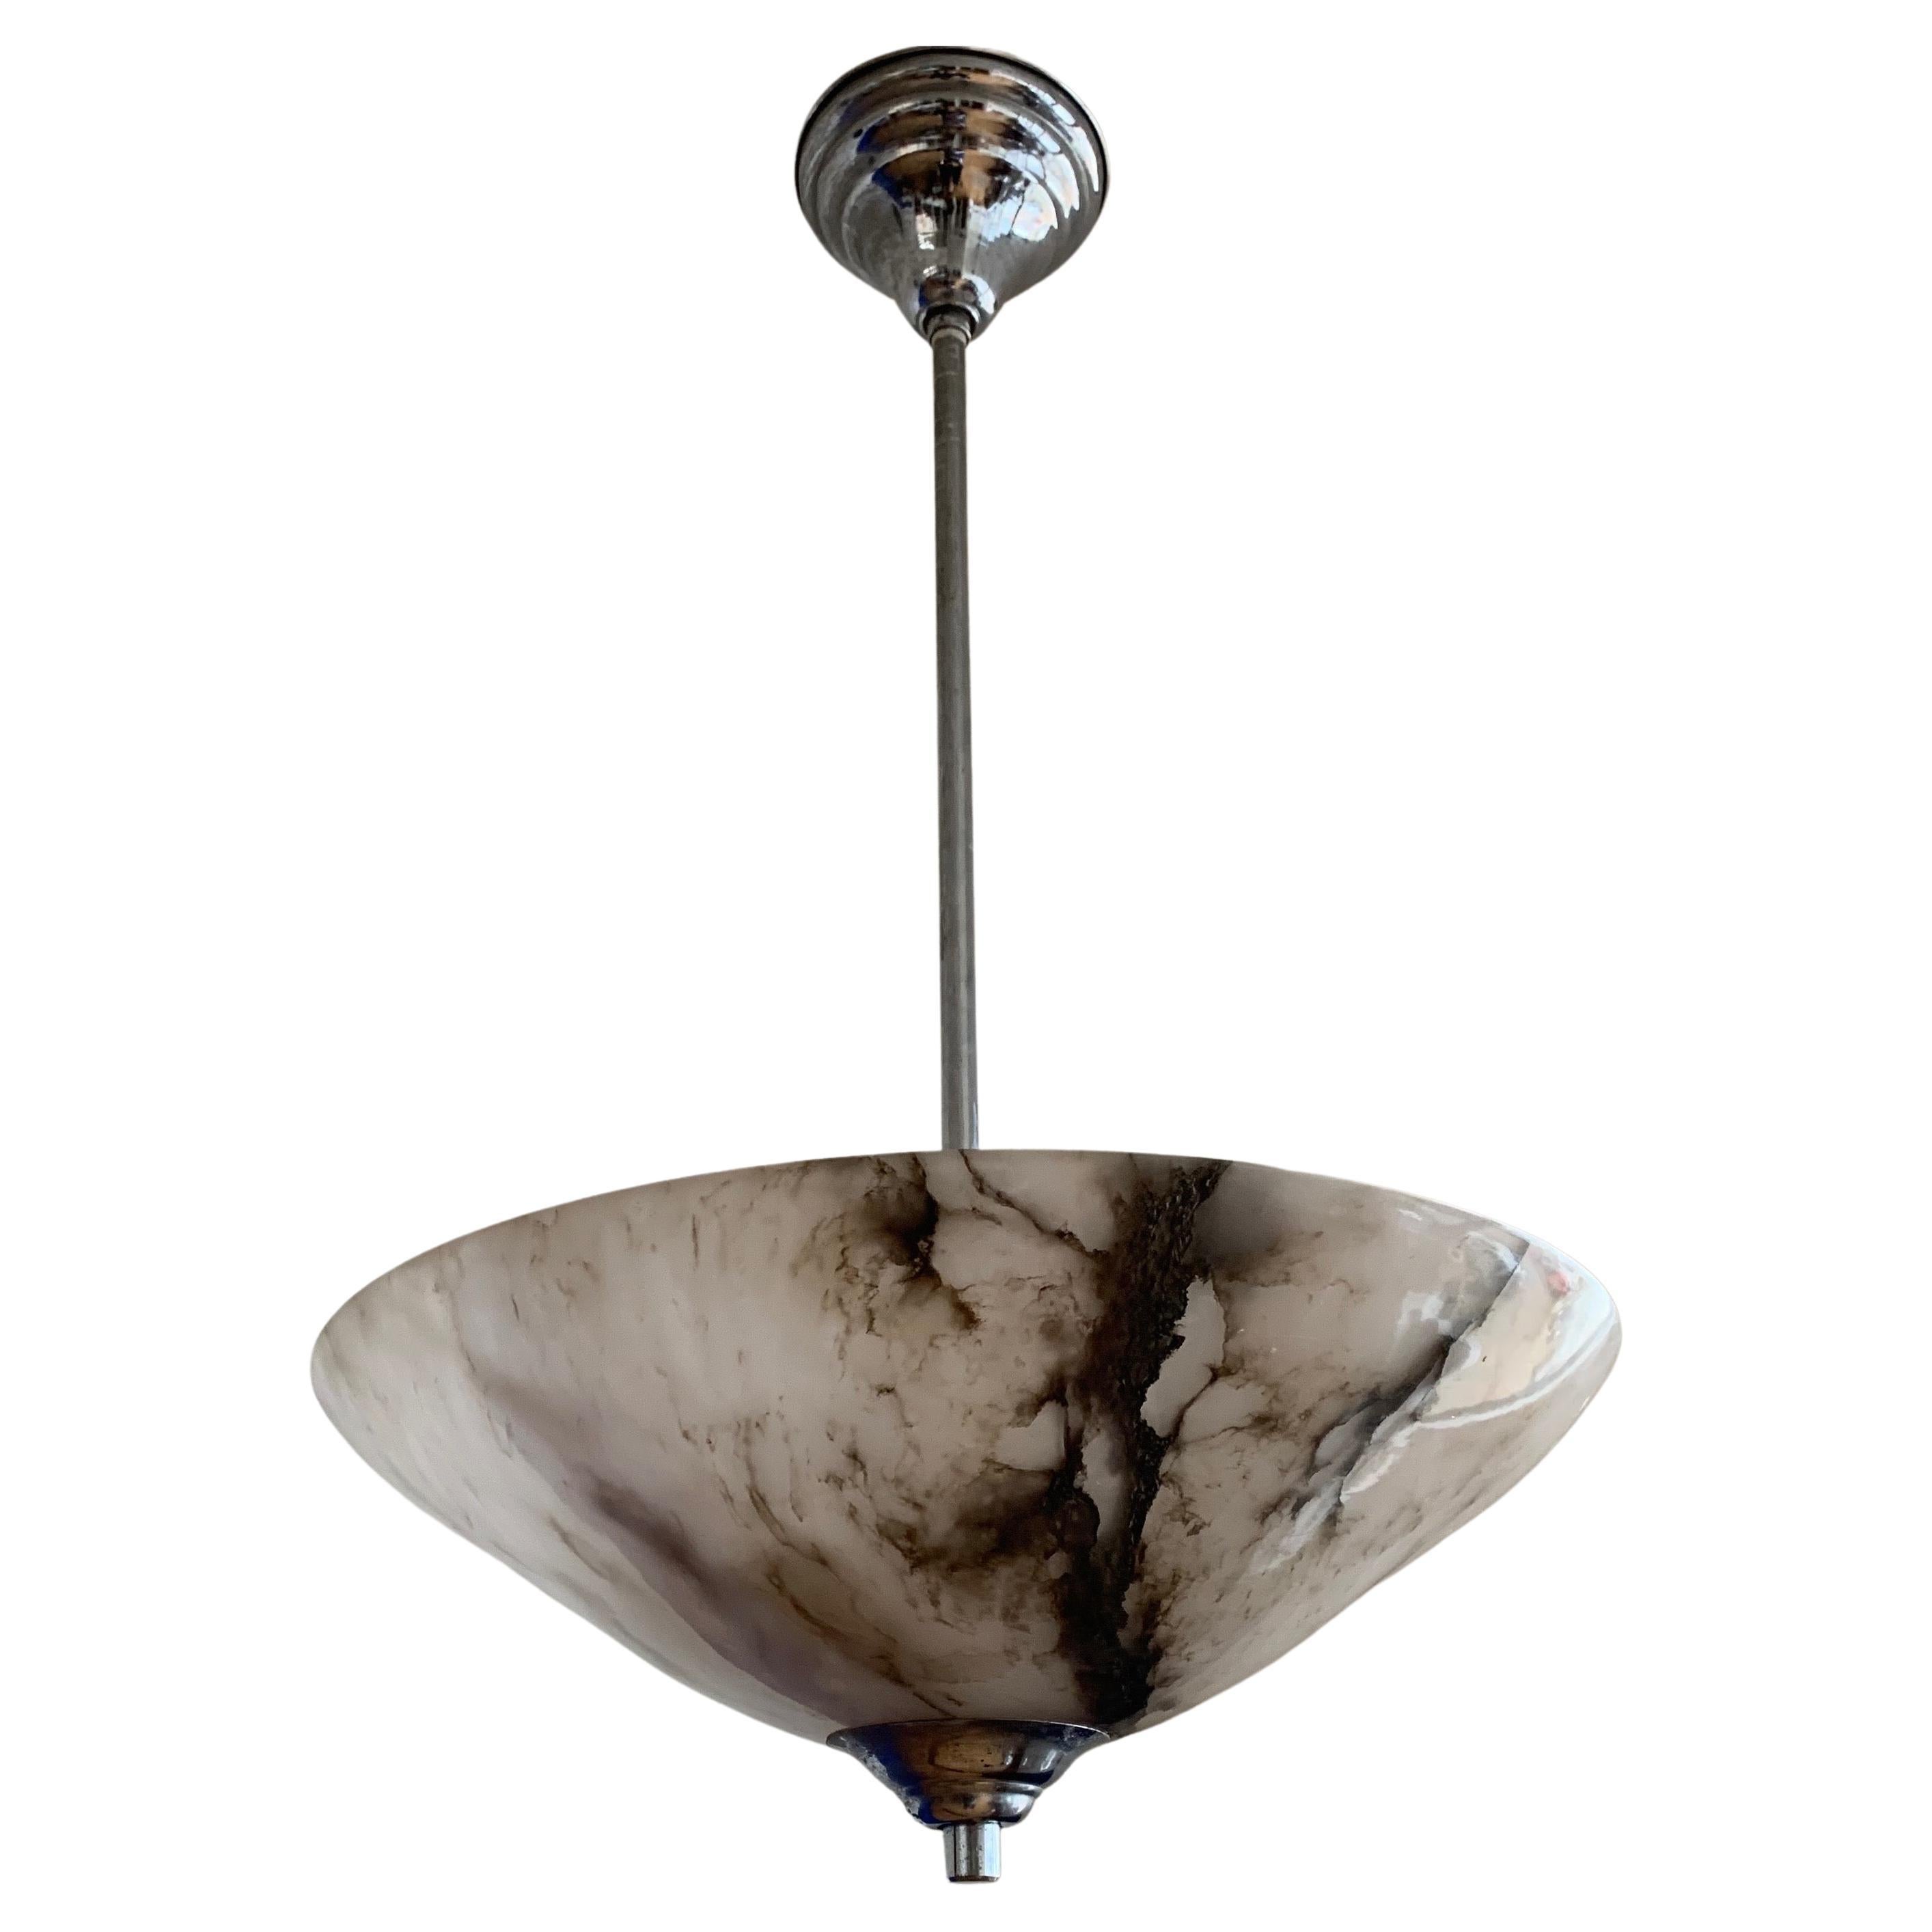 Awesome Art Deco Pendant Light with Stunning Alabaster Mineral Stone Shade, 1920